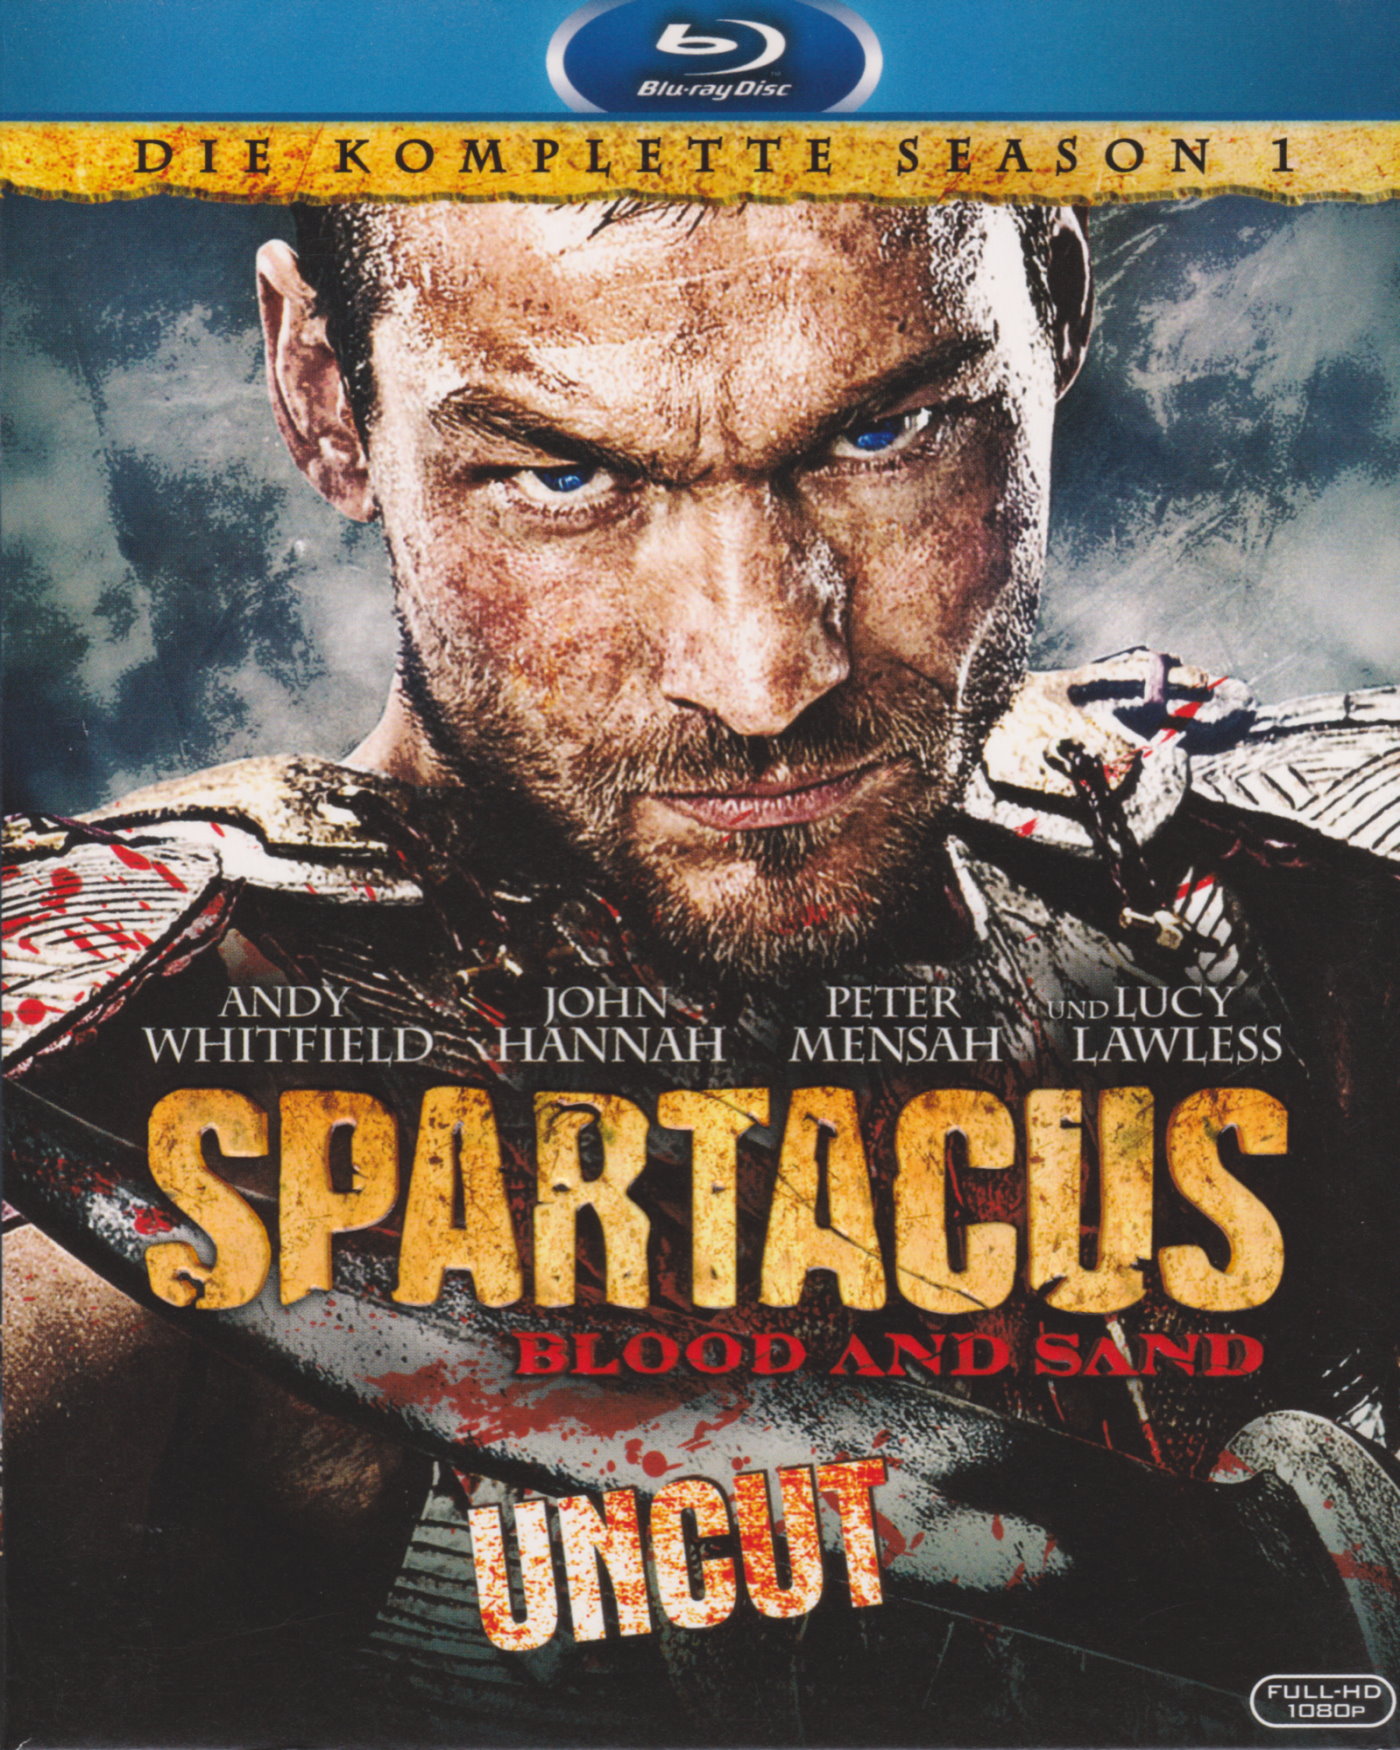 Cover - Spartacus - Blood and Sand / Vengeance / War of the Damned.jpg